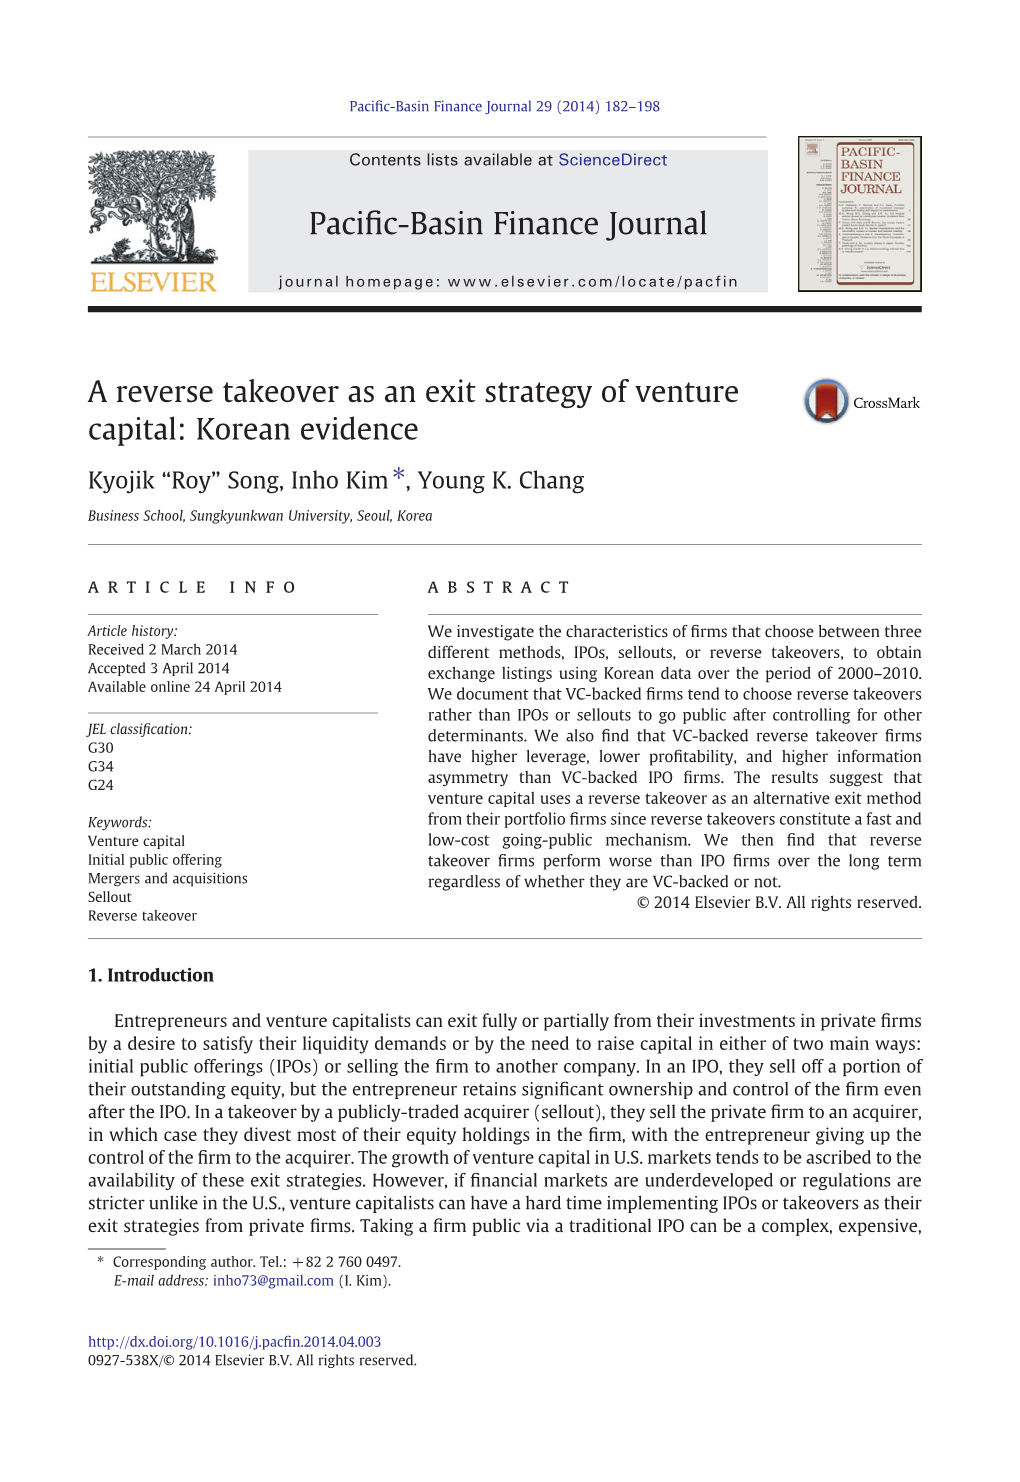 A Reverse Takeover As an Exit Strategy of Venture Capital: Korean Evidence